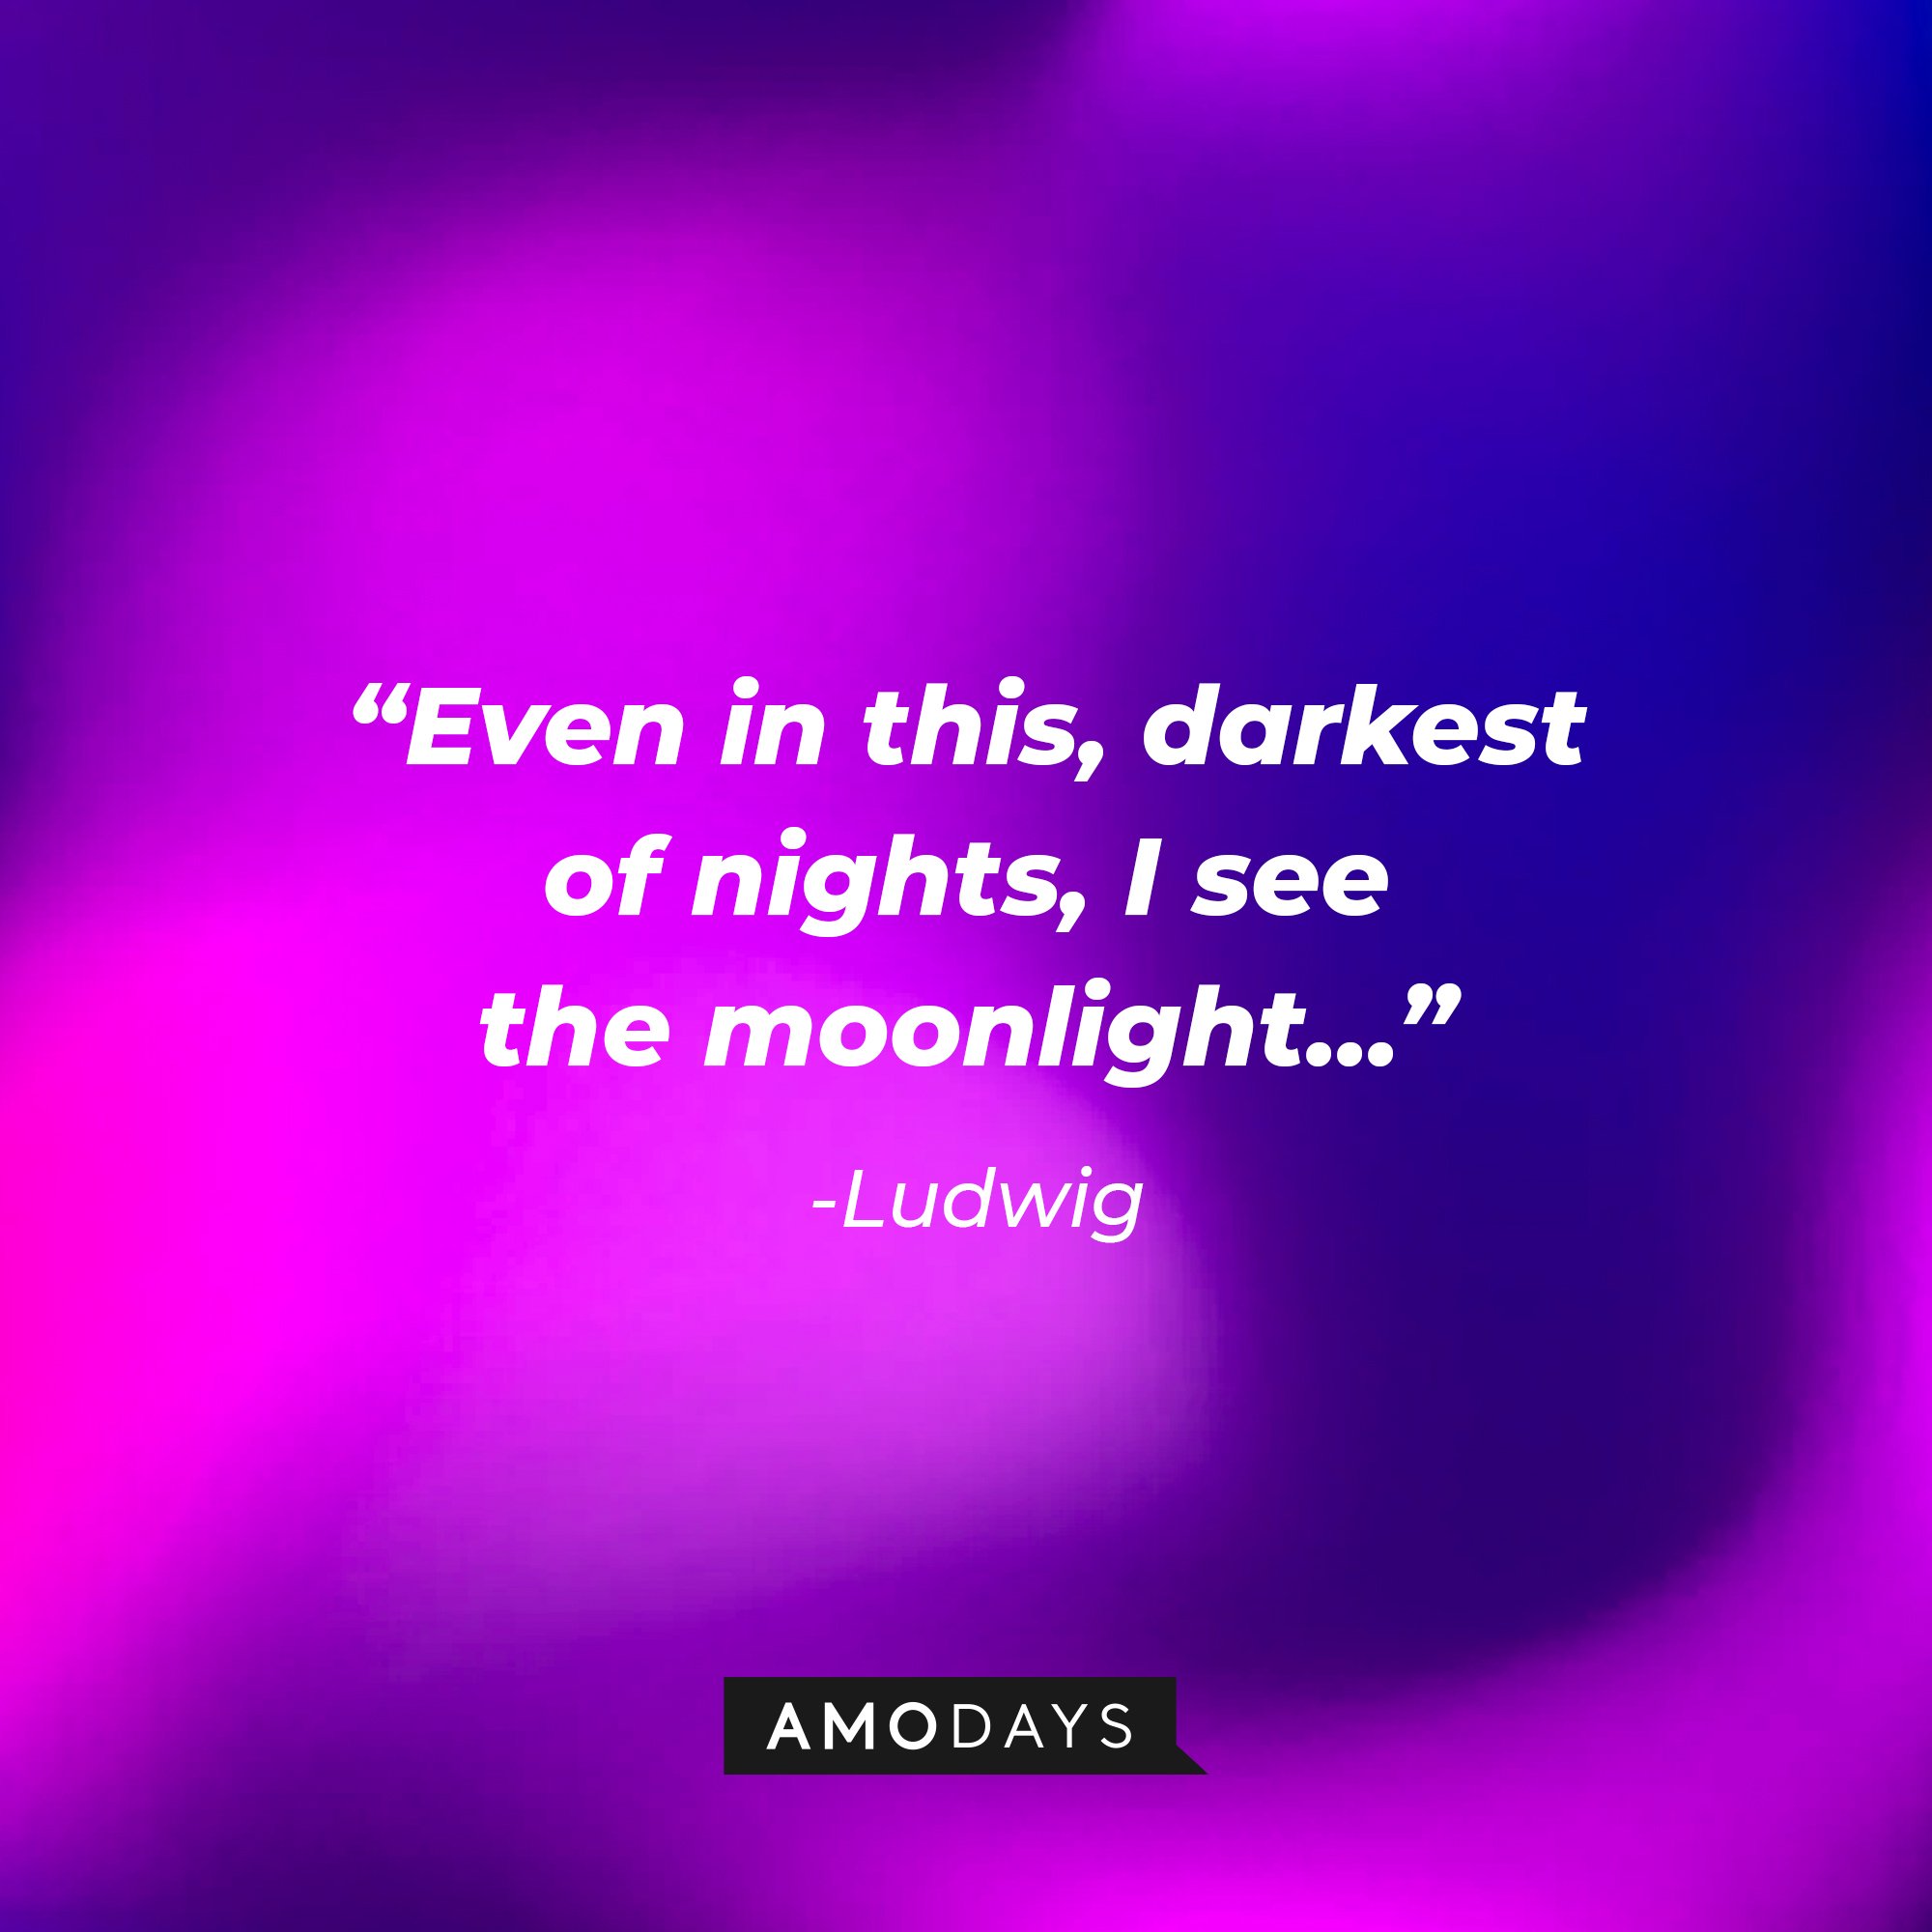  Ludwig’s quote: "Even in this, darkest of nights, I see the moonlight..." | Image: AmoDays